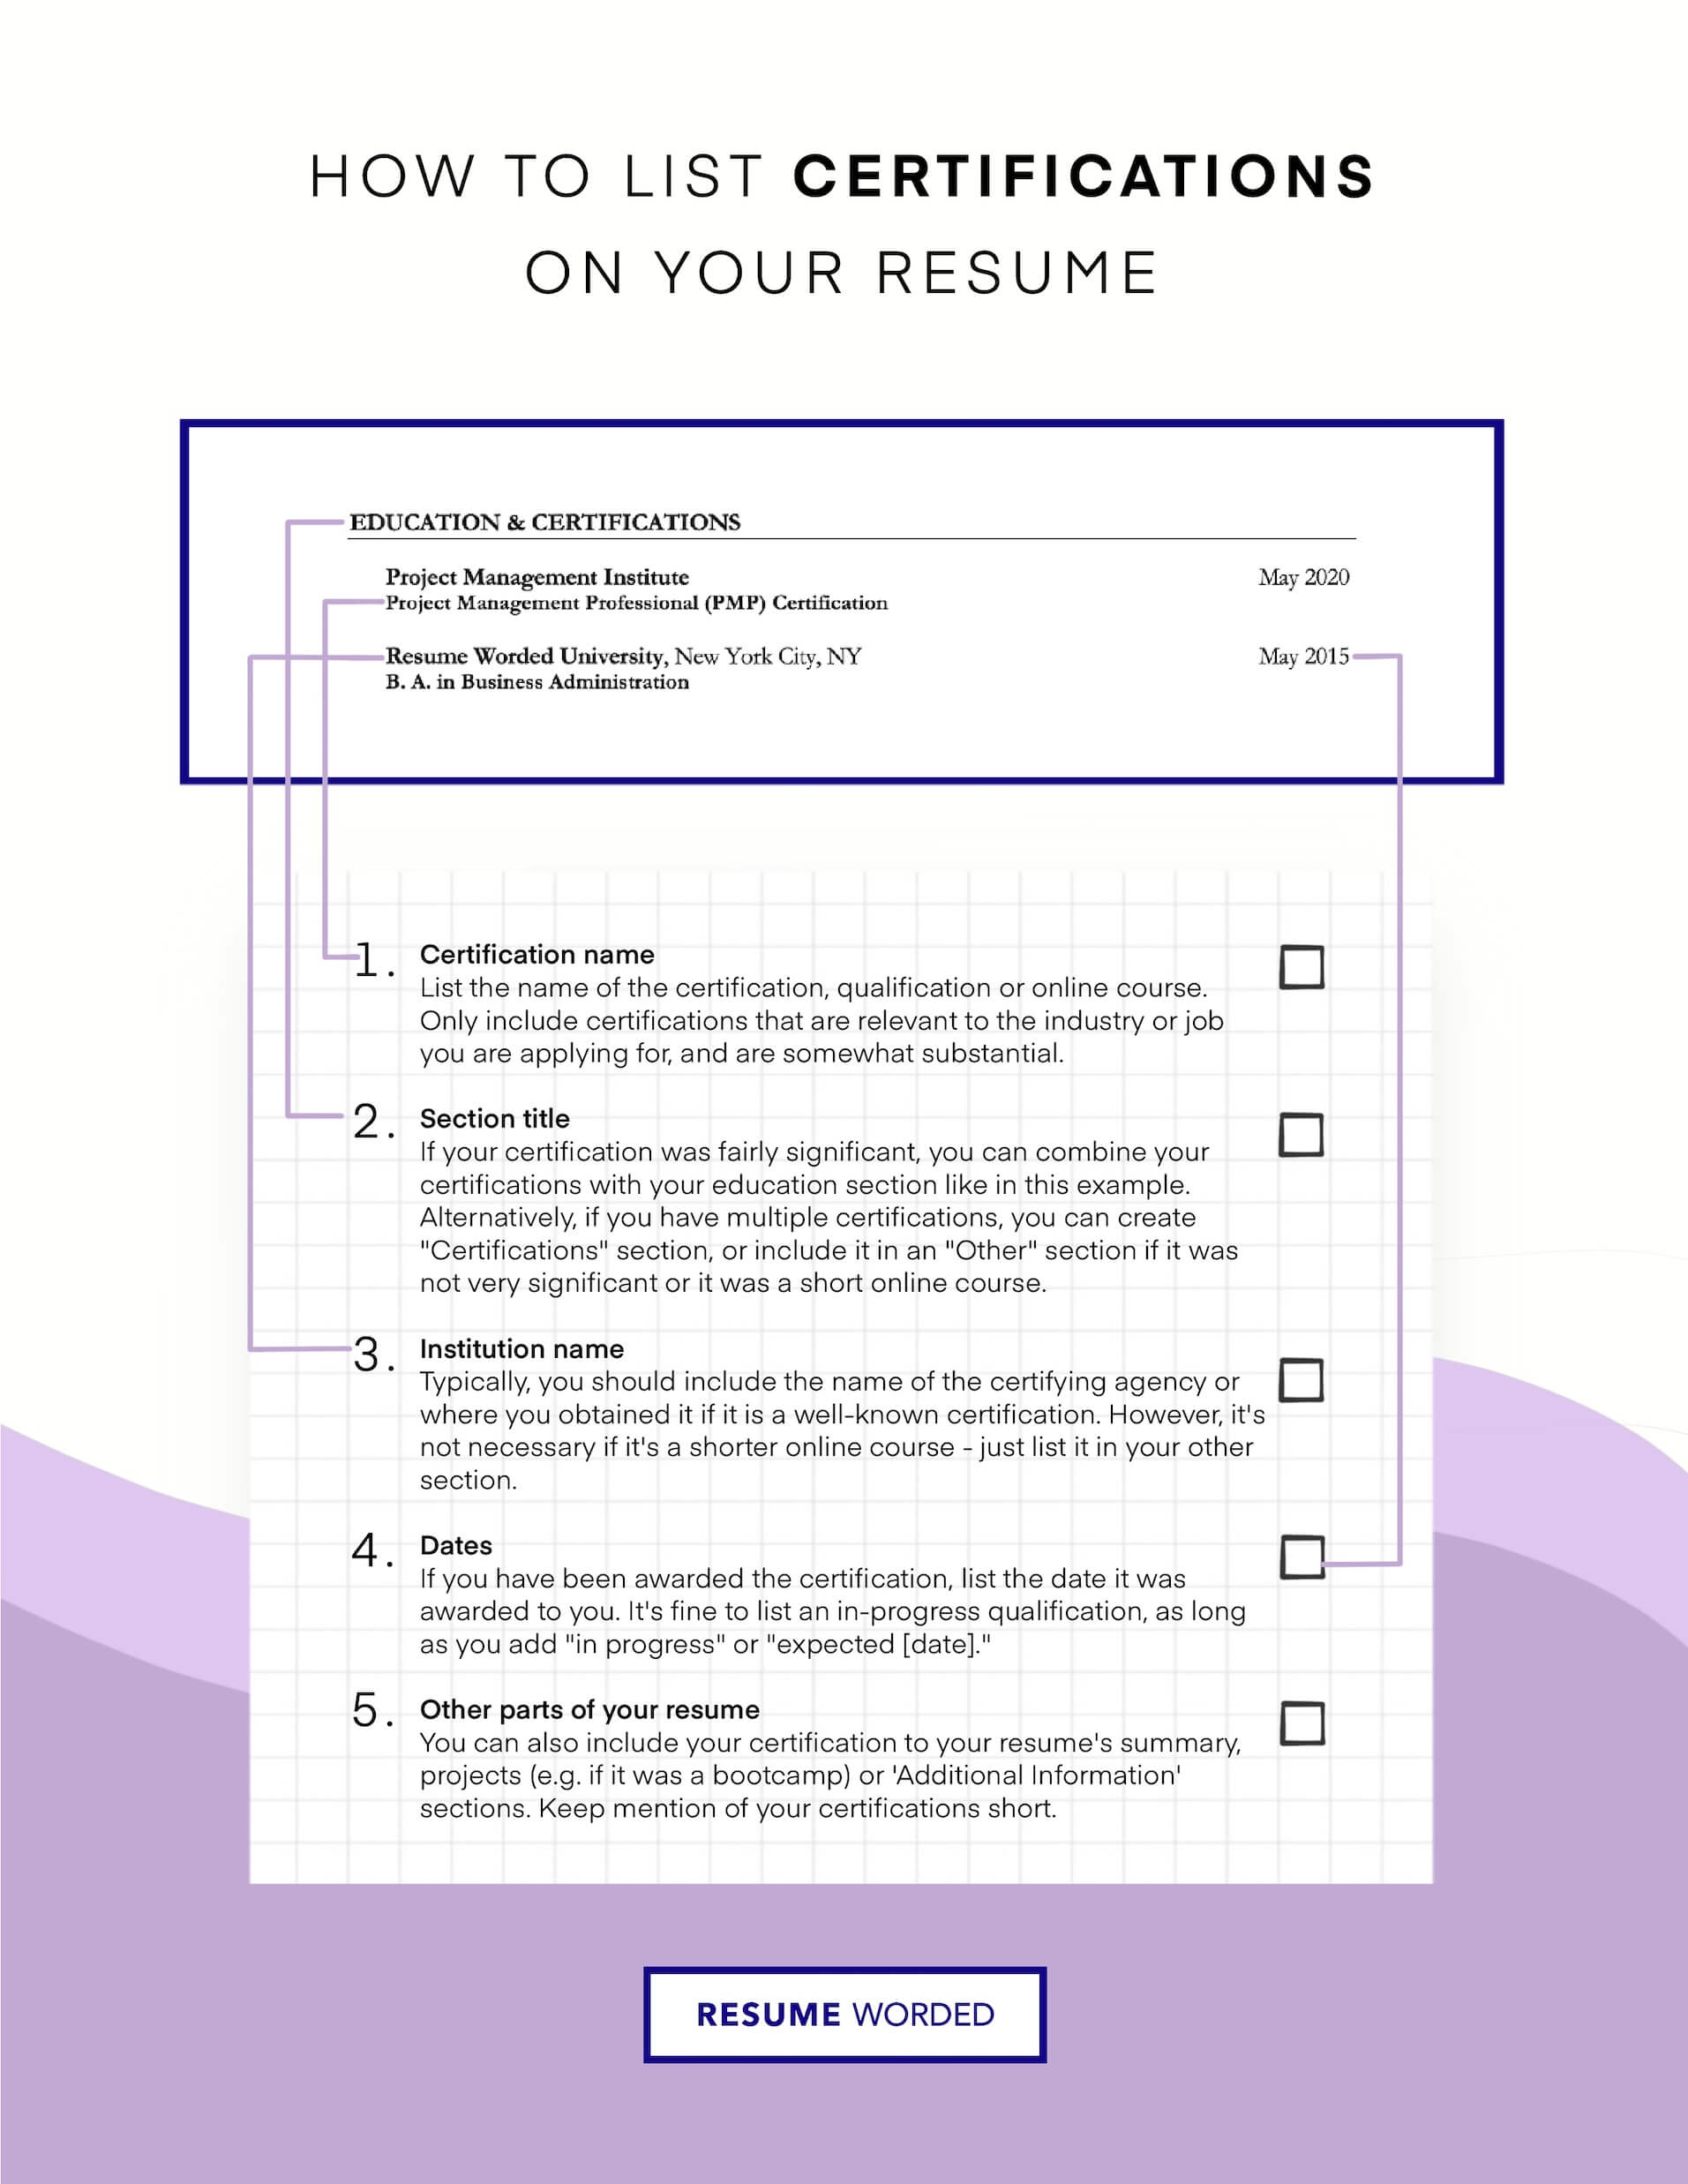 Highlights certificates that are relevant to an inside sales associate - Inside Sales Representative  Resume